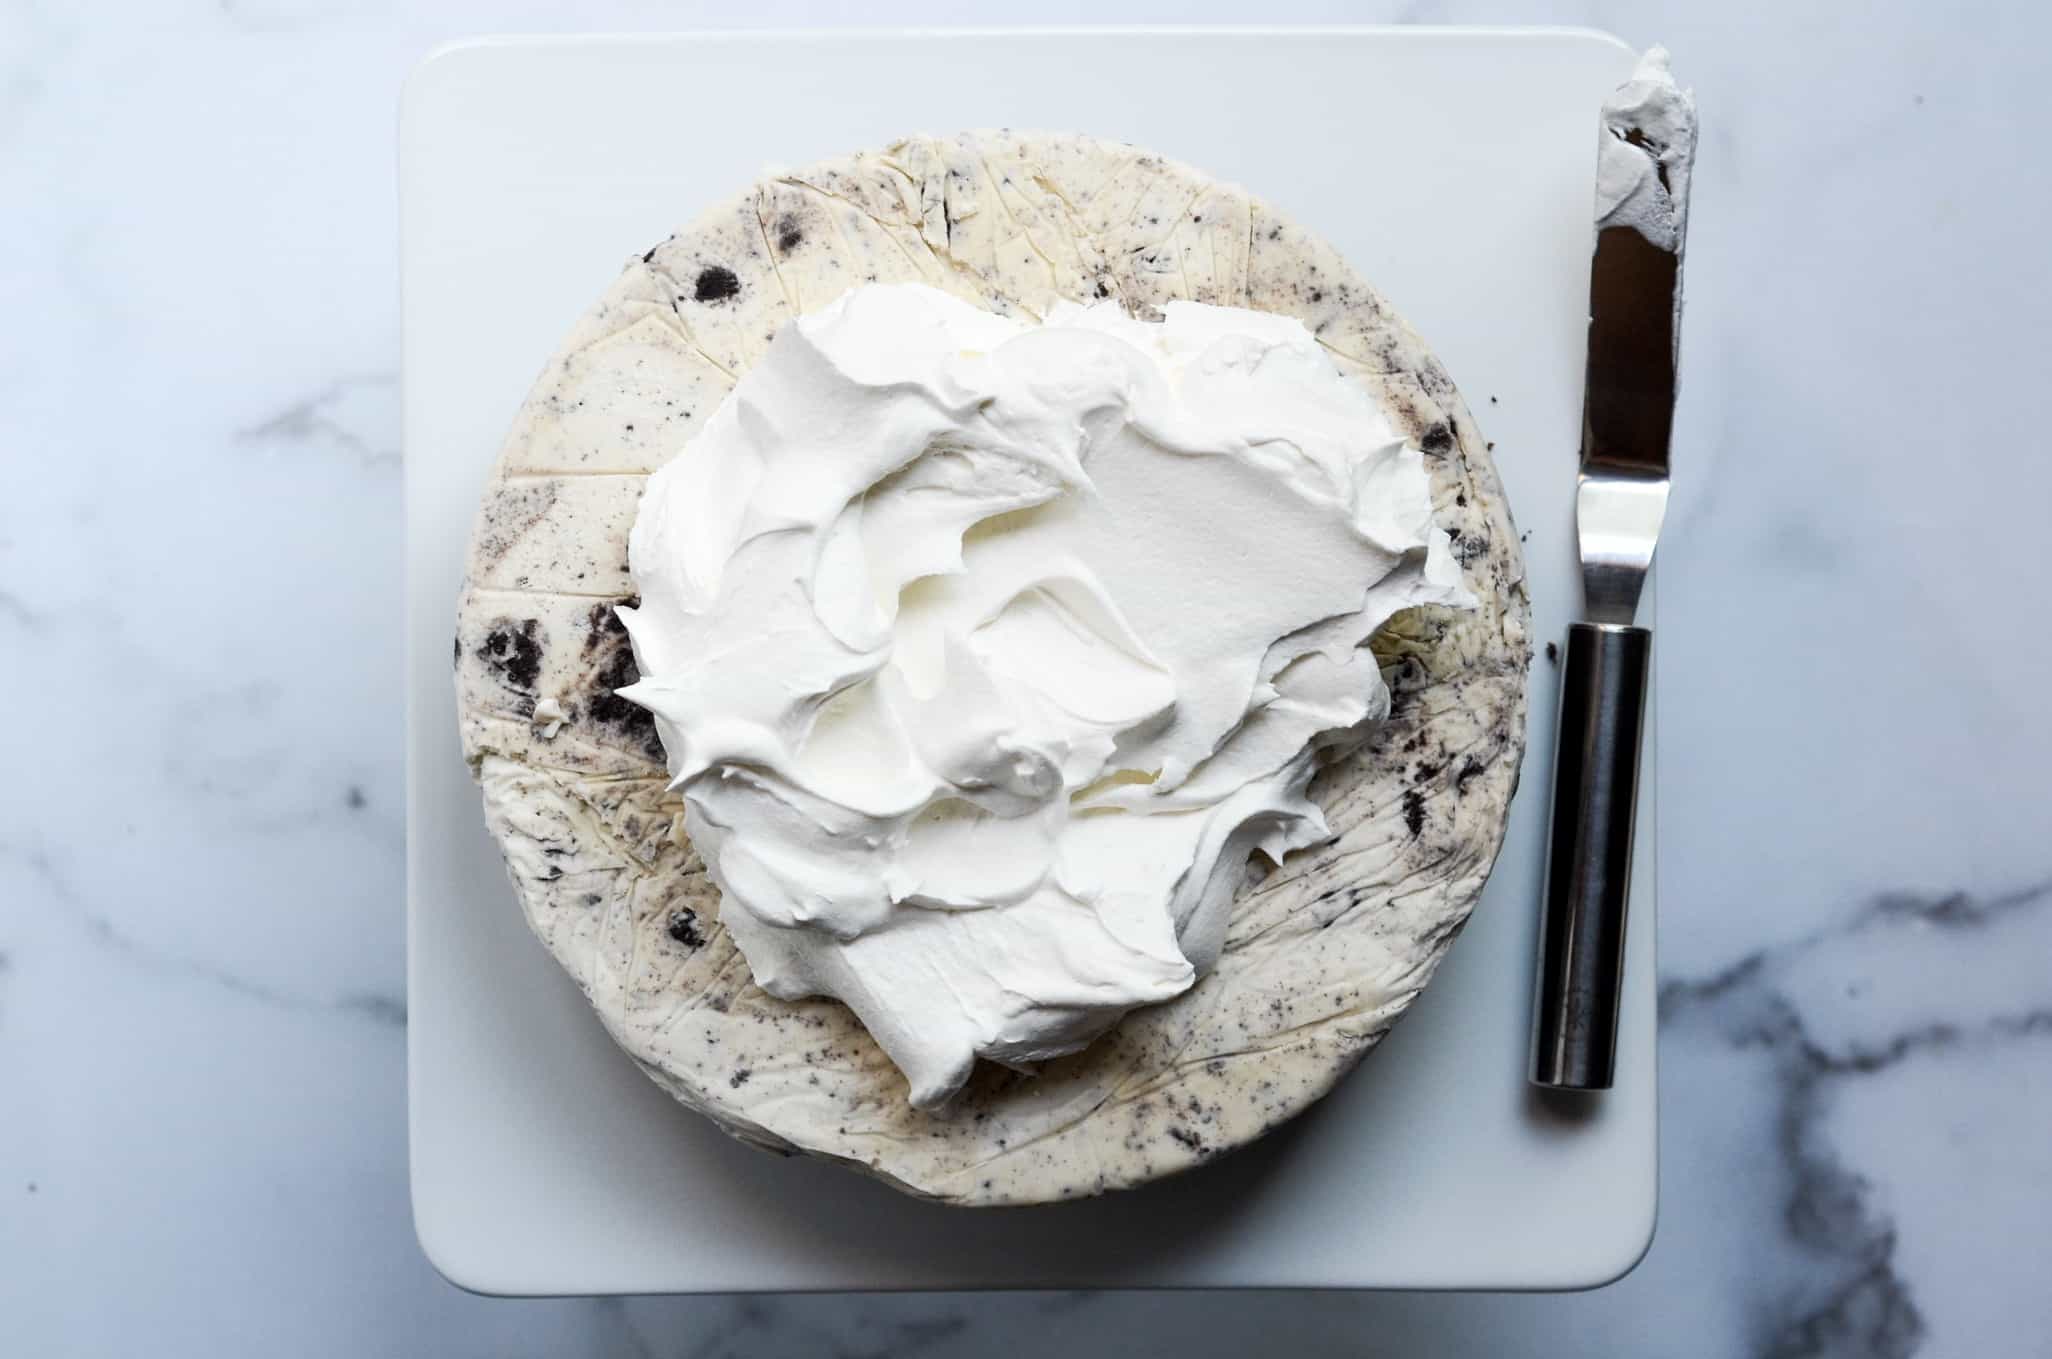 whipped topping on top of ice cream cake